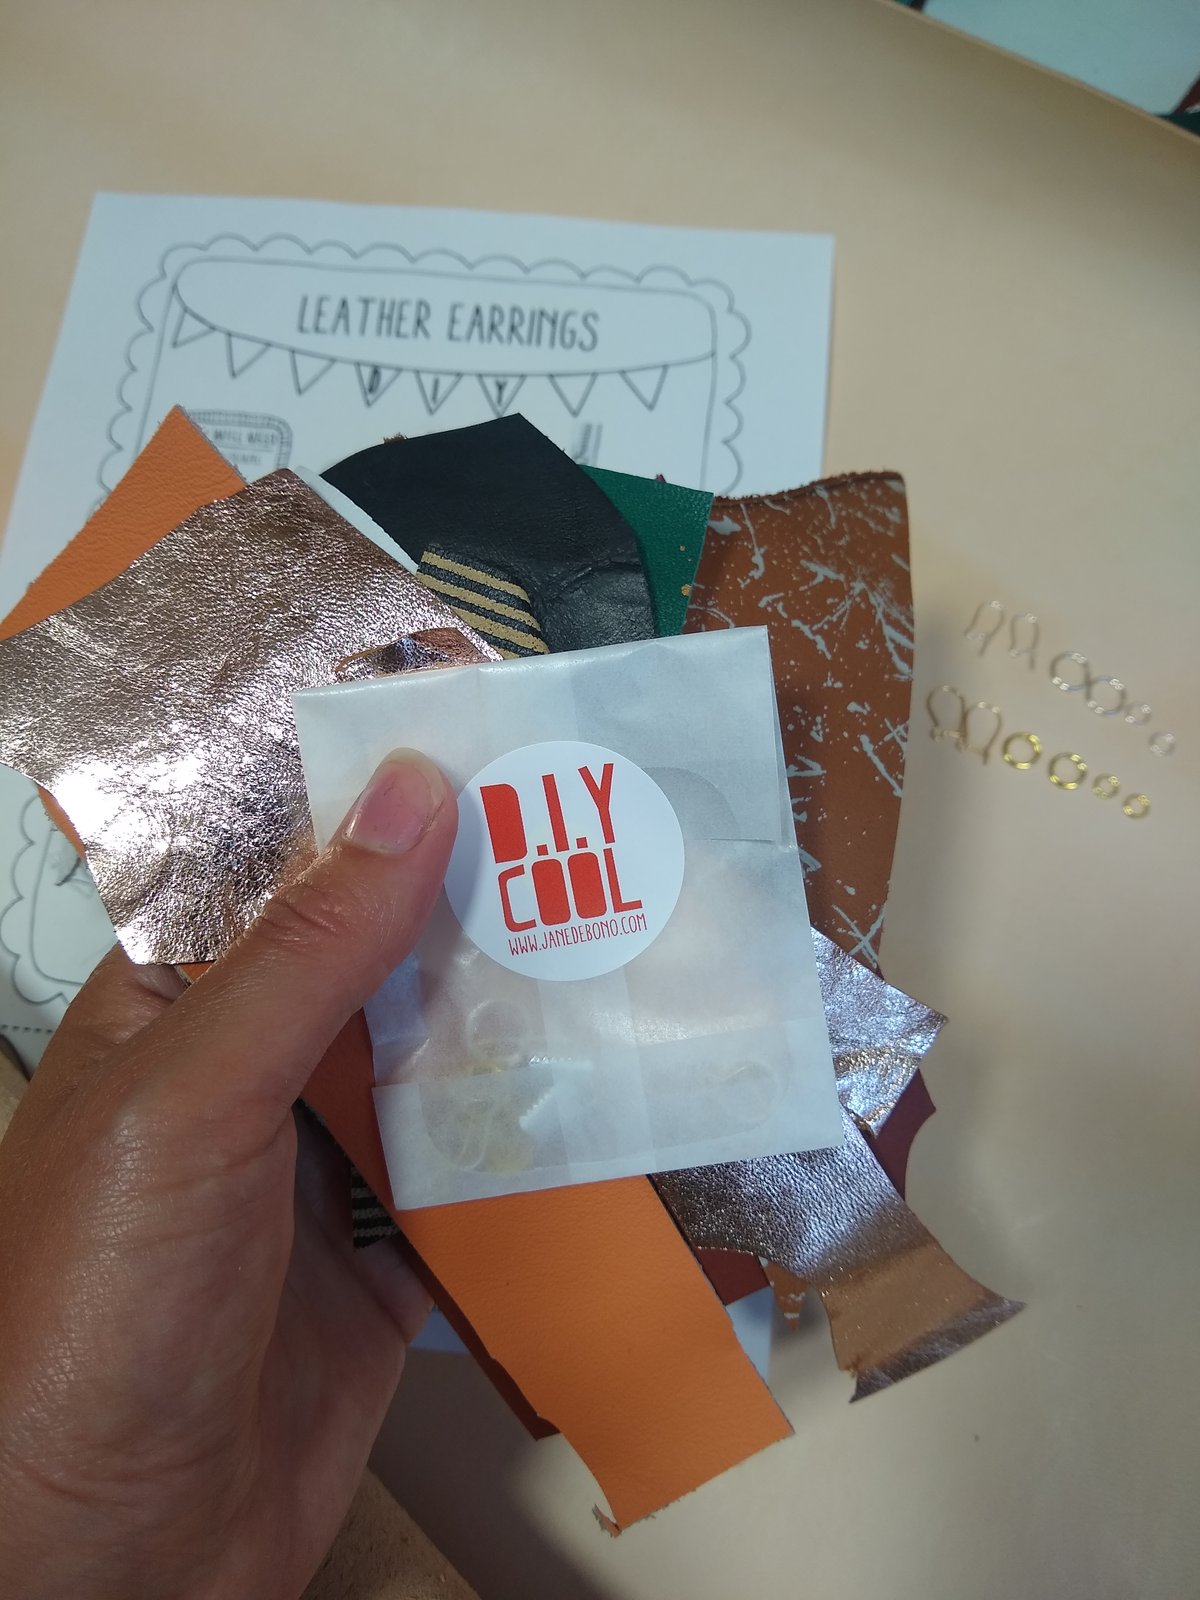 Image of D.I.Y Leather Earrings & Things Crafty Box